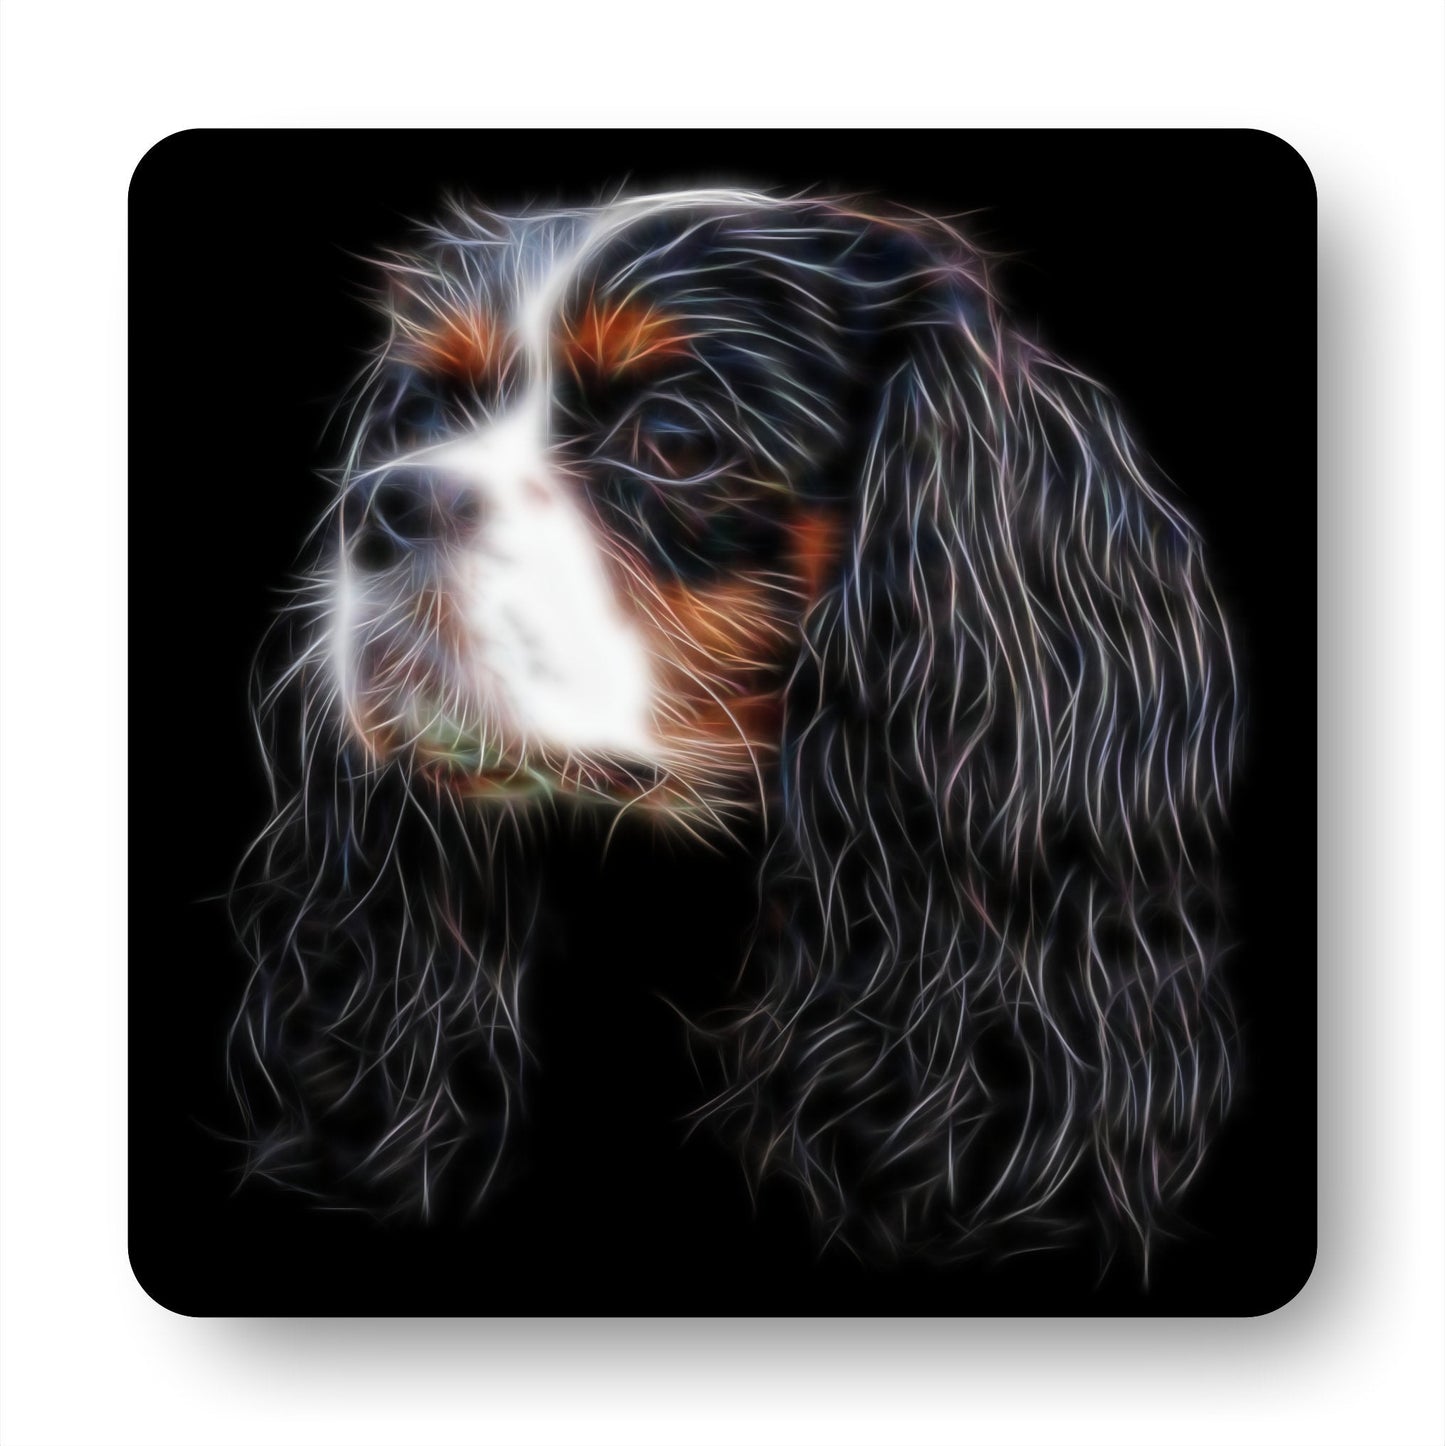 Tricolour King Charles Spaniel Coasters, Set of 4, with Fractal Art Design